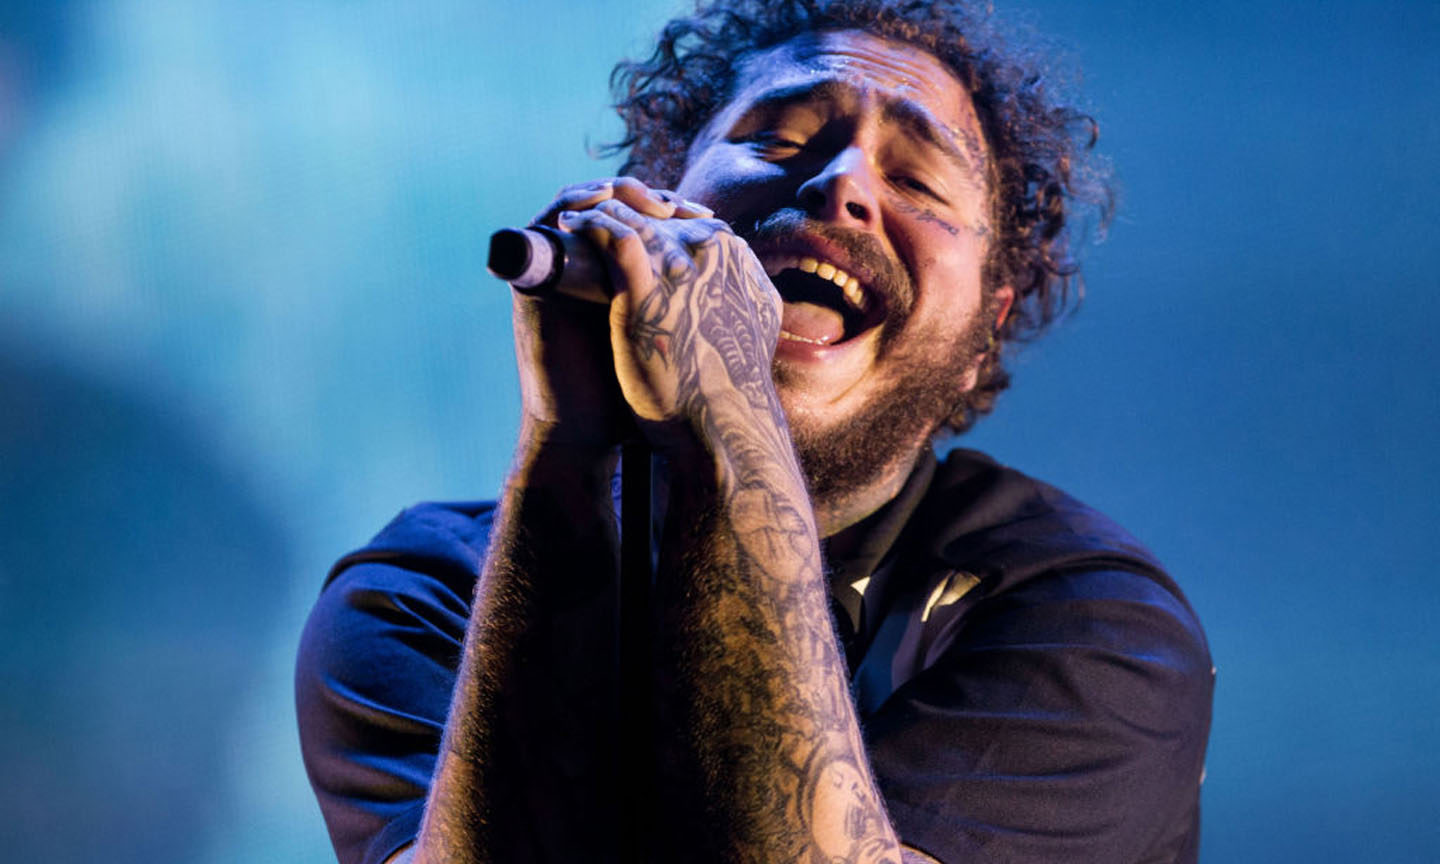 Post Malone Raises $200,000 For Charity With Gaming For Love Streams